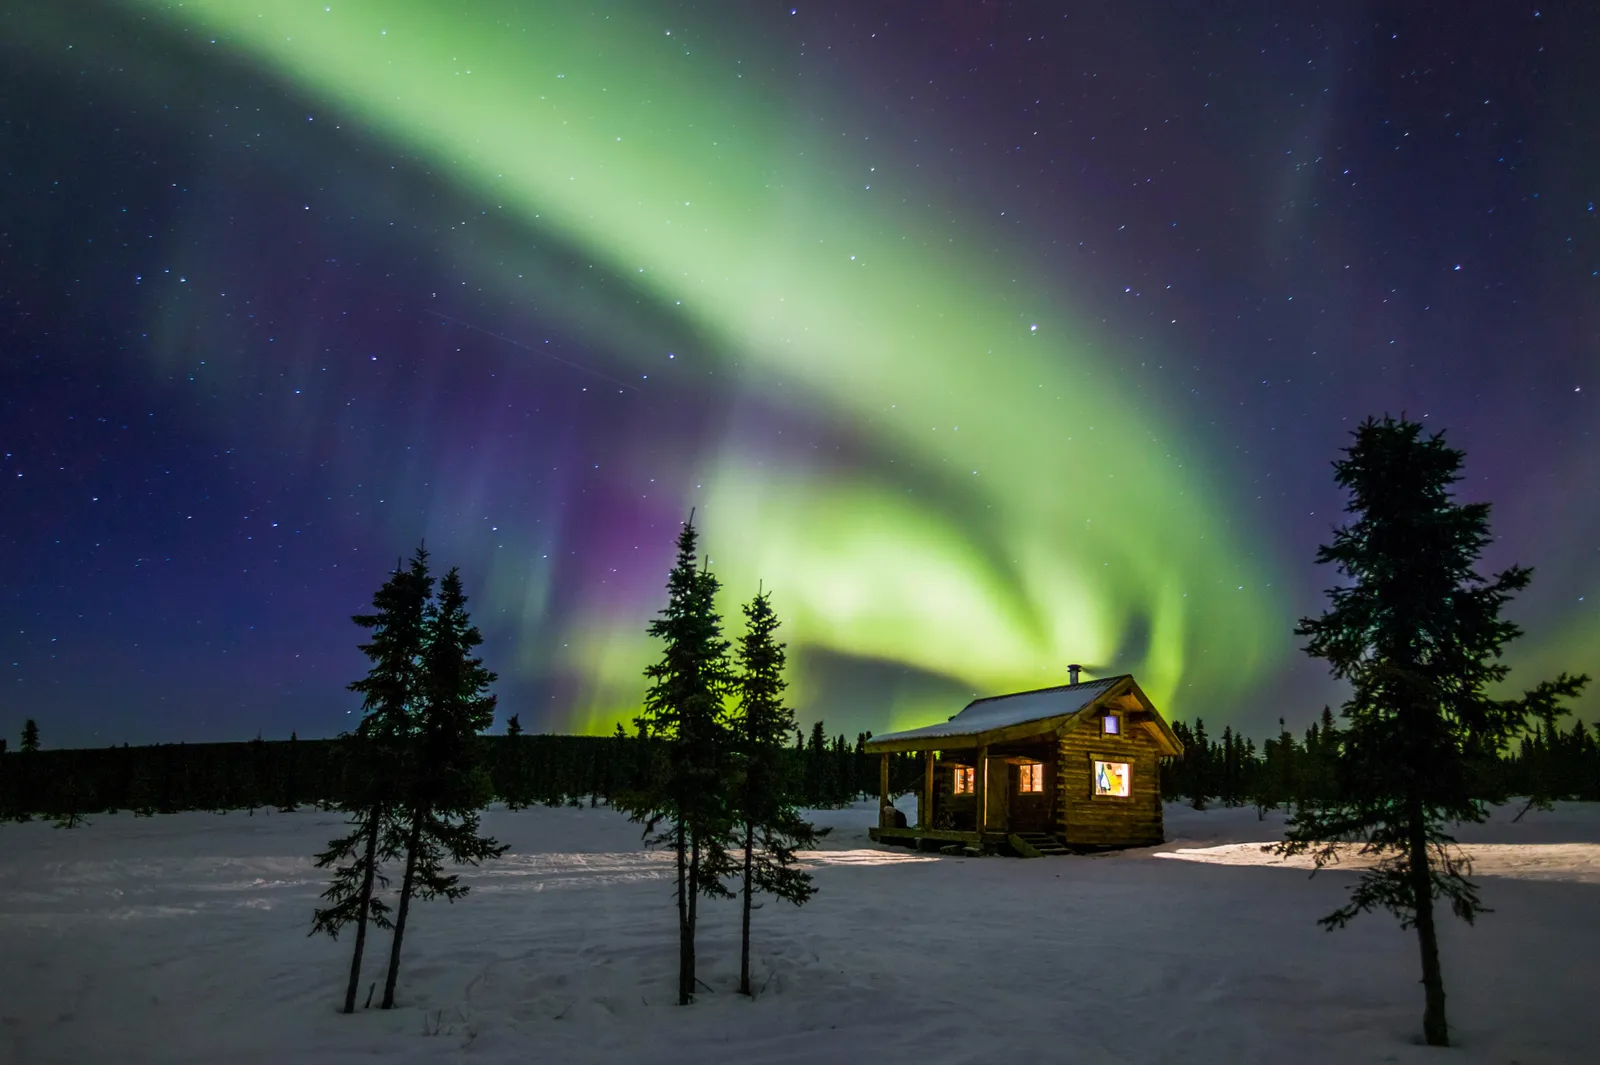 The northern lights: A history of aurora sightings